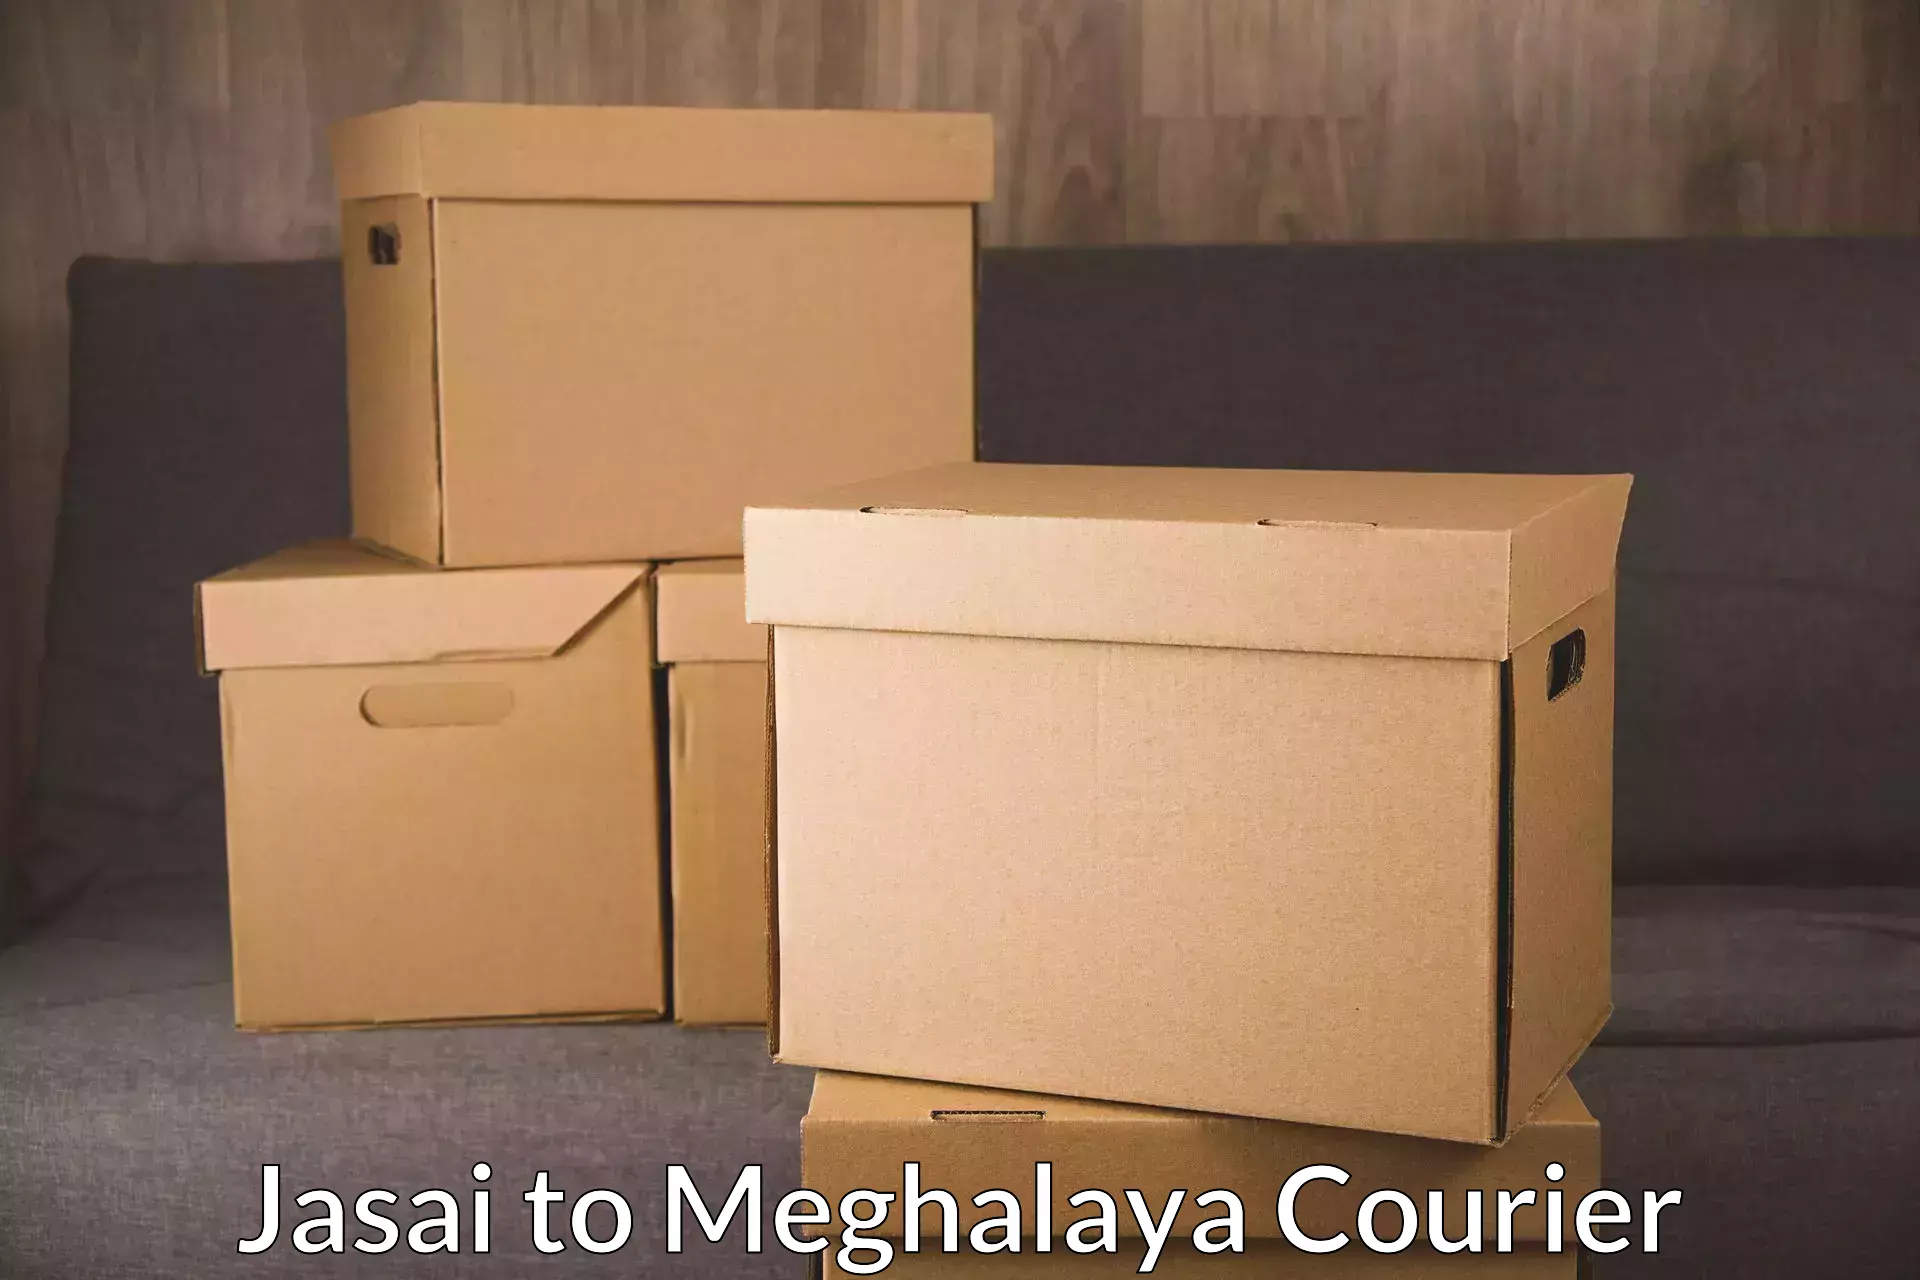 State-of-the-art courier technology Jasai to Meghalaya